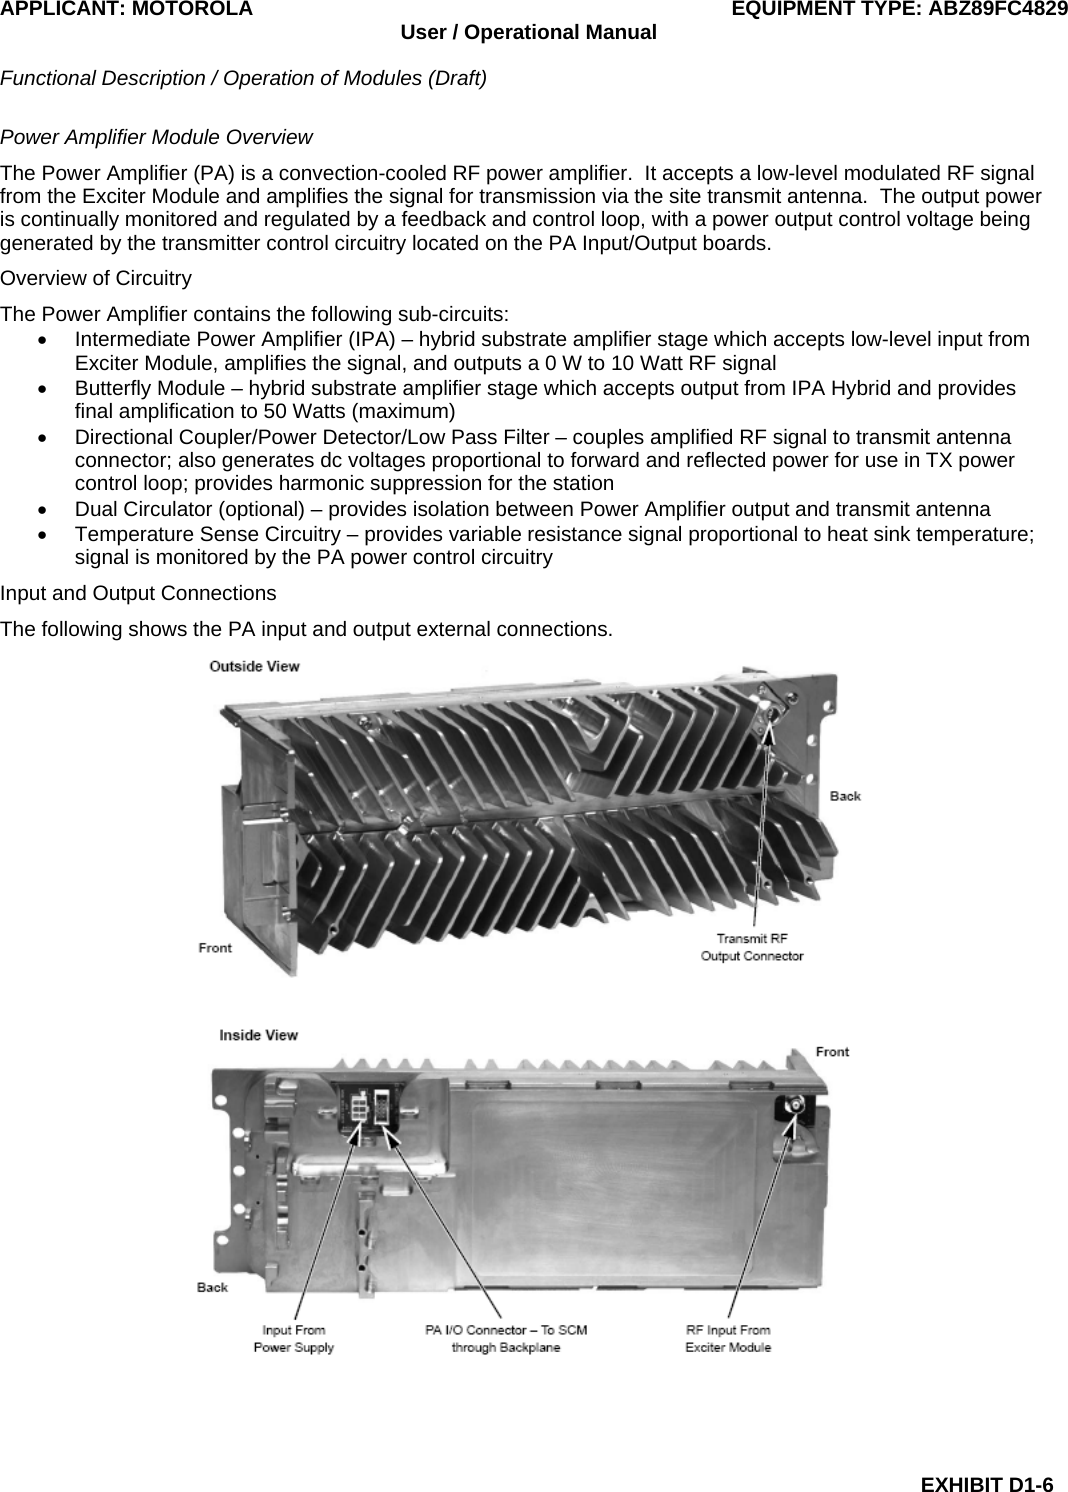 APPLICANT: MOTOROLA  EQUIPMENT TYPE: ABZ89FC4829 User / Operational Manual  Functional Description / Operation of Modules (Draft)  EXHIBIT D1-6 Power Amplifier Module Overview The Power Amplifier (PA) is a convection-cooled RF power amplifier.  It accepts a low-level modulated RF signal from the Exciter Module and amplifies the signal for transmission via the site transmit antenna.  The output power is continually monitored and regulated by a feedback and control loop, with a power output control voltage being generated by the transmitter control circuitry located on the PA Input/Output boards. Overview of Circuitry The Power Amplifier contains the following sub-circuits: •  Intermediate Power Amplifier (IPA) – hybrid substrate amplifier stage which accepts low-level input from Exciter Module, amplifies the signal, and outputs a 0 W to 10 Watt RF signal •  Butterfly Module – hybrid substrate amplifier stage which accepts output from IPA Hybrid and provides final amplification to 50 Watts (maximum) •  Directional Coupler/Power Detector/Low Pass Filter – couples amplified RF signal to transmit antenna connector; also generates dc voltages proportional to forward and reflected power for use in TX power control loop; provides harmonic suppression for the station •  Dual Circulator (optional) – provides isolation between Power Amplifier output and transmit antenna •  Temperature Sense Circuitry – provides variable resistance signal proportional to heat sink temperature; signal is monitored by the PA power control circuitry Input and Output Connections The following shows the PA input and output external connections.  